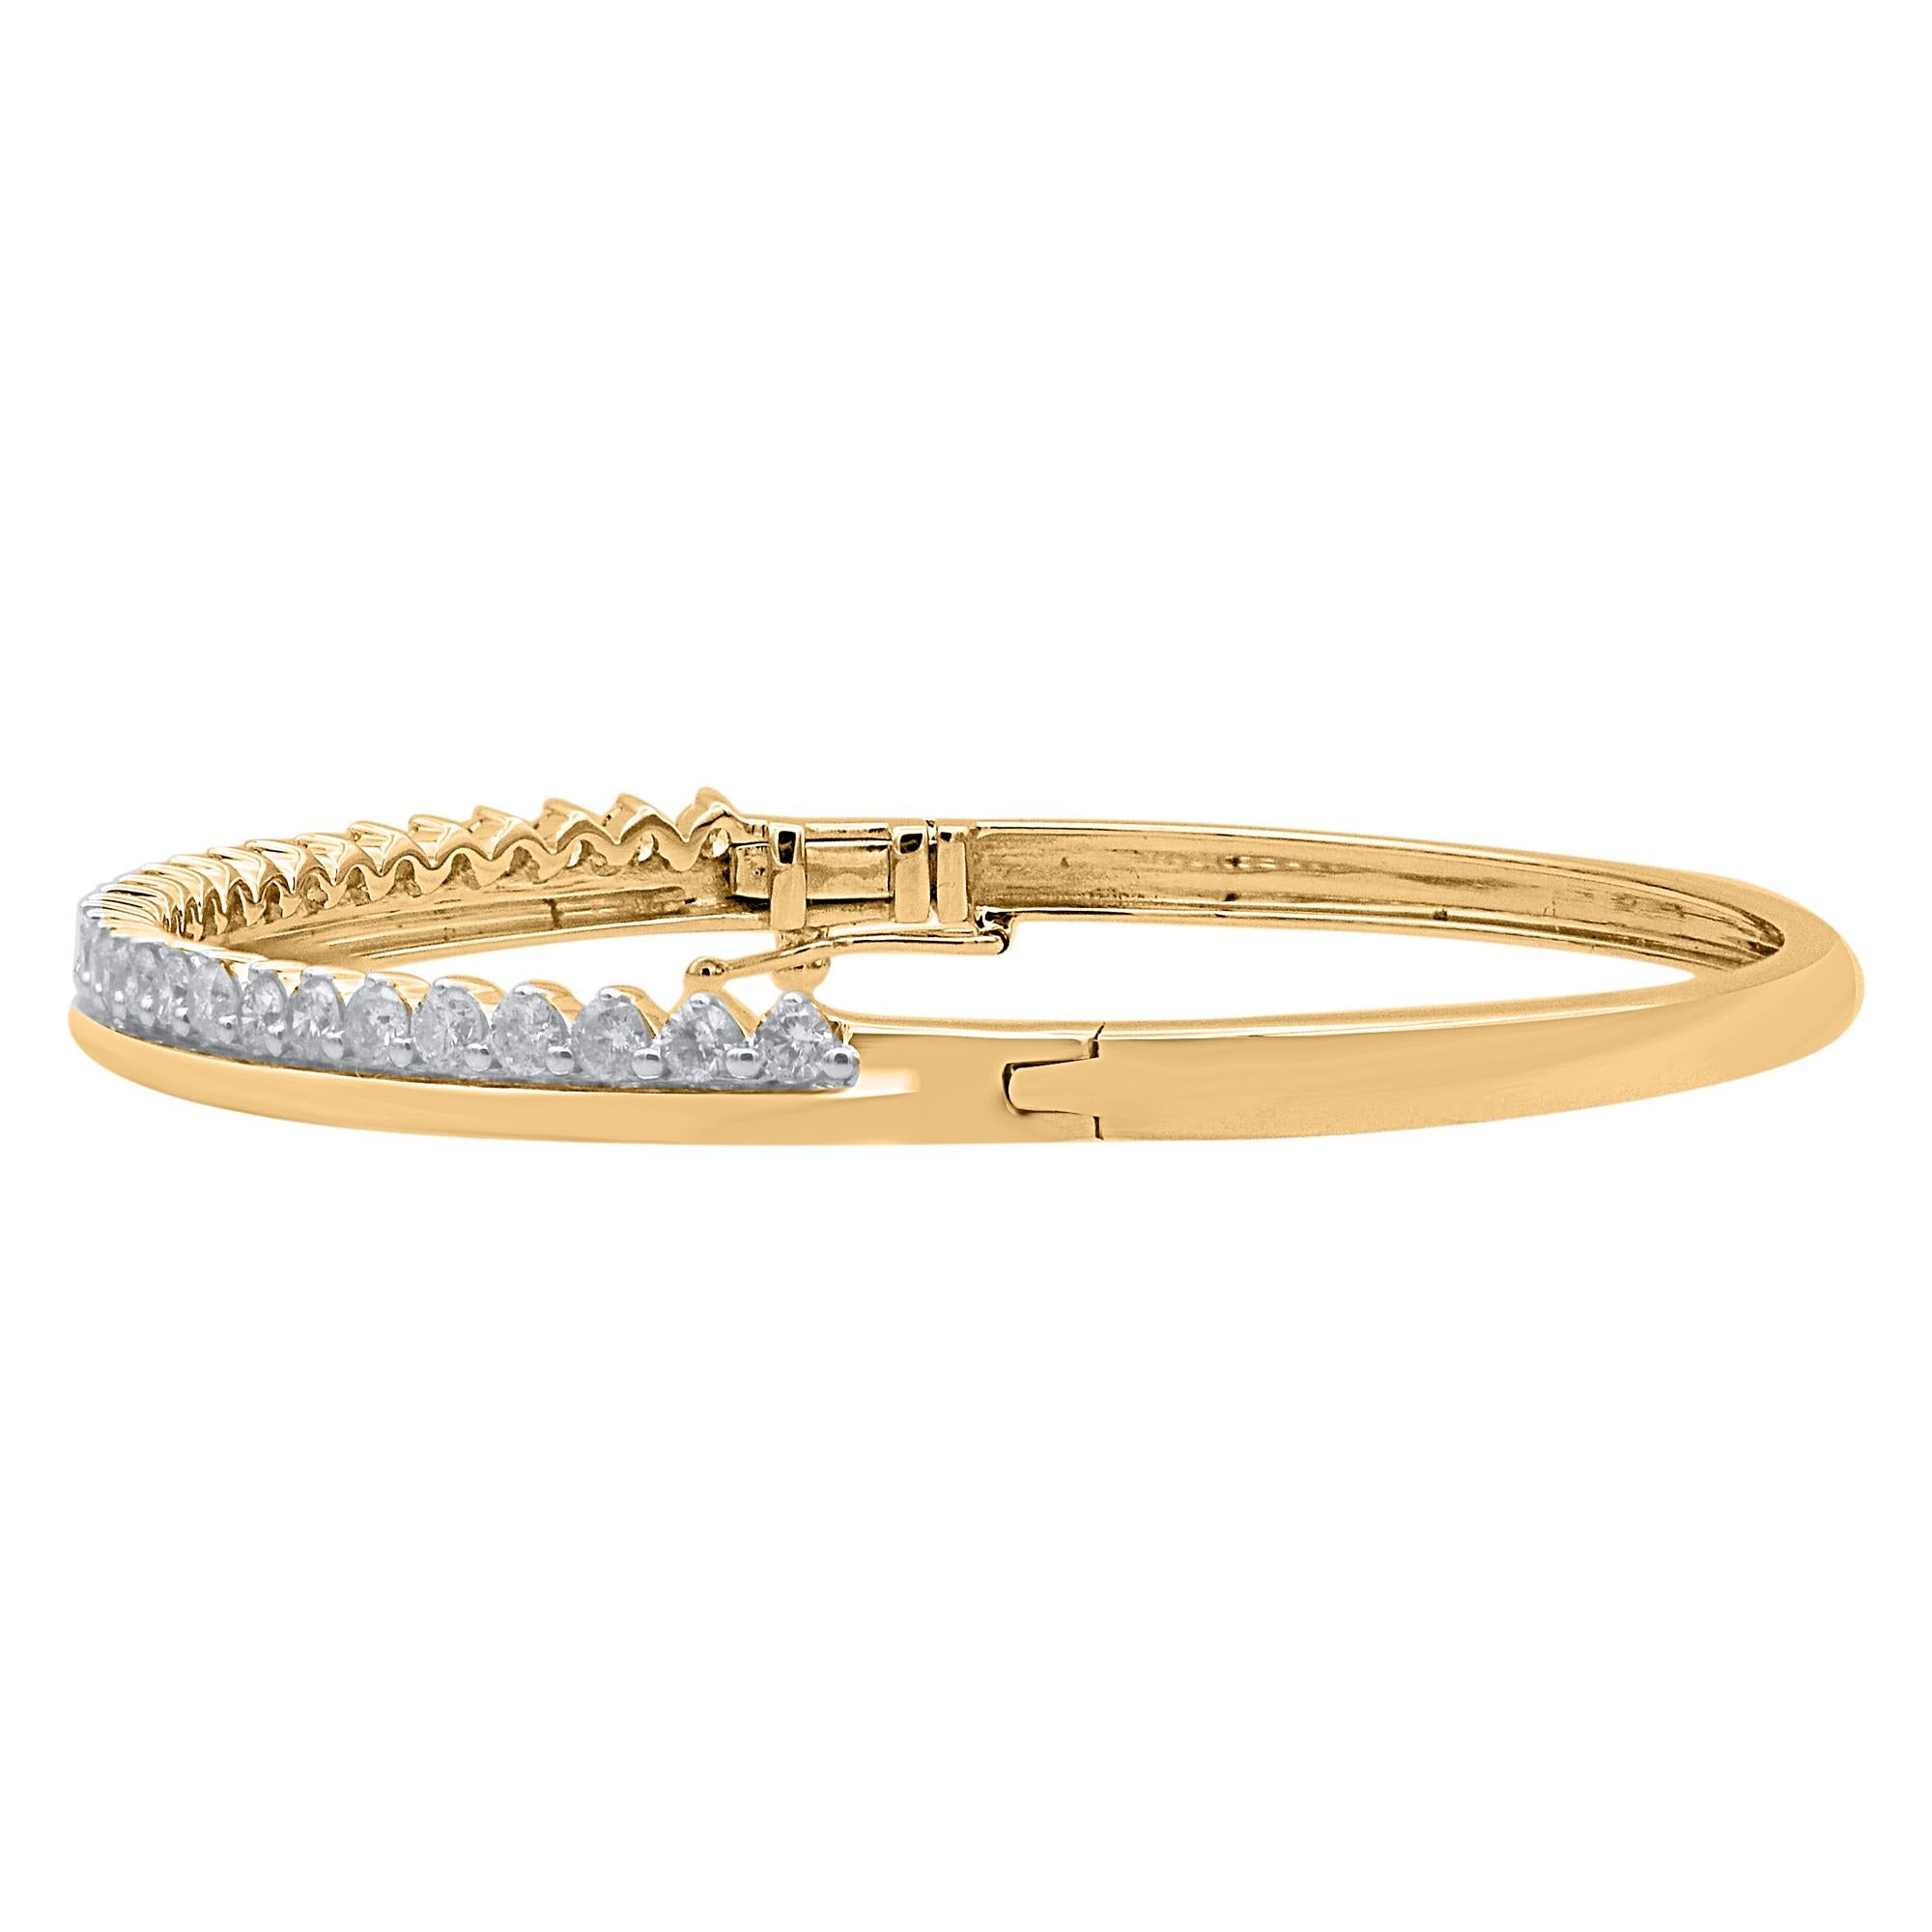 Classic and sophisticated, this diamond bangle bracelet pairs well with any attire.
This Shimmering bangle features 29 brilliant cut natural diamonds in prong setting and crafted in 18 kt yellow gold. Diamonds are graded H-I color, I2 clarity. 
